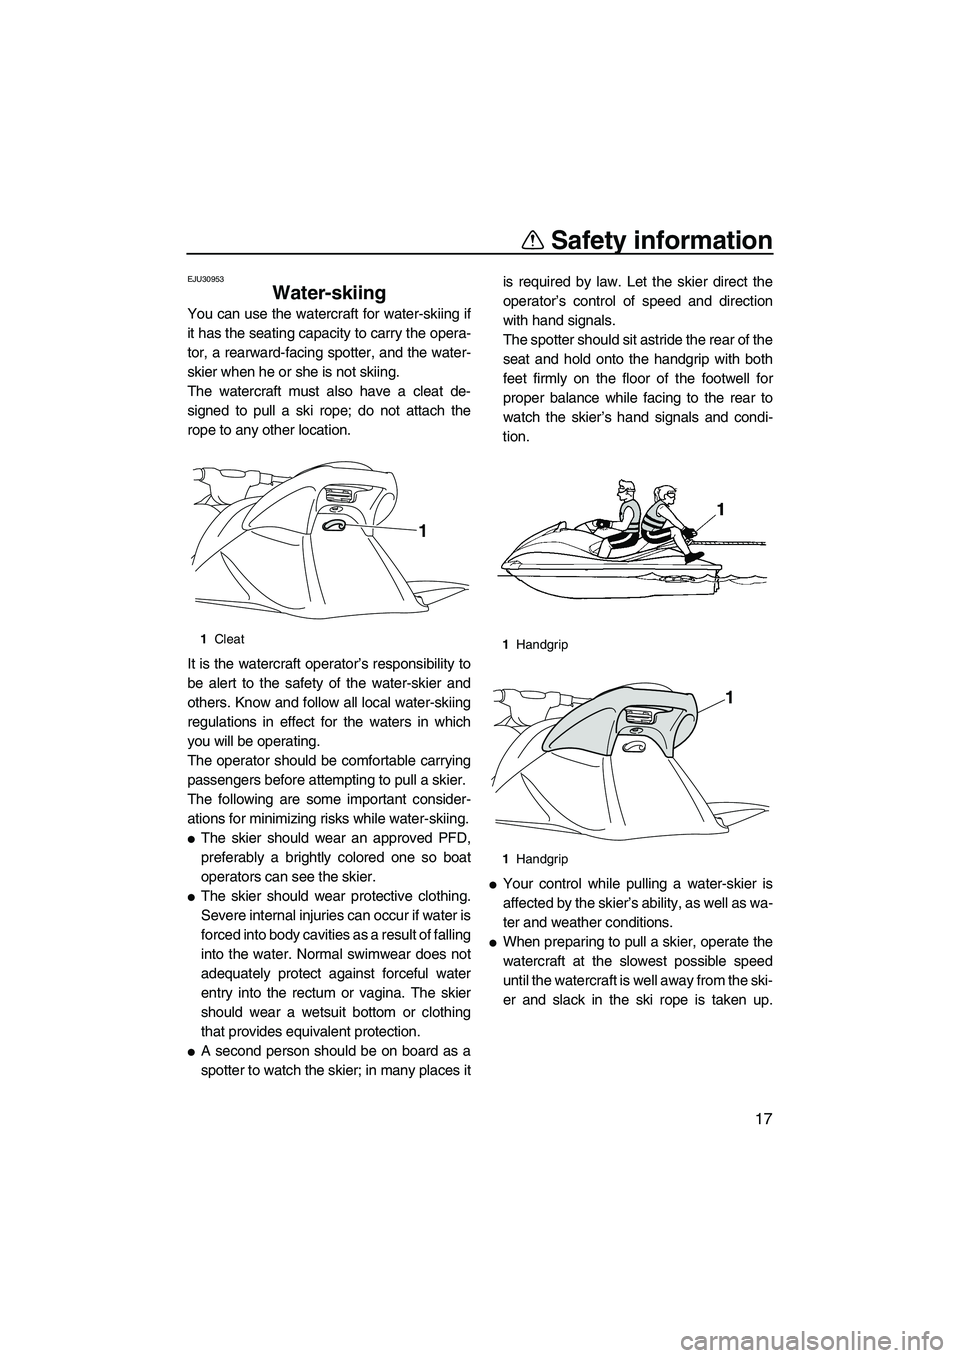 YAMAHA VXS 2012 Owners Manual Safety information
17
EJU30953
Water-skiing 
You can use the watercraft for water-skiing if
it has the seating capacity to carry the opera-
tor, a rearward-facing spotter, and the water-
skier when he